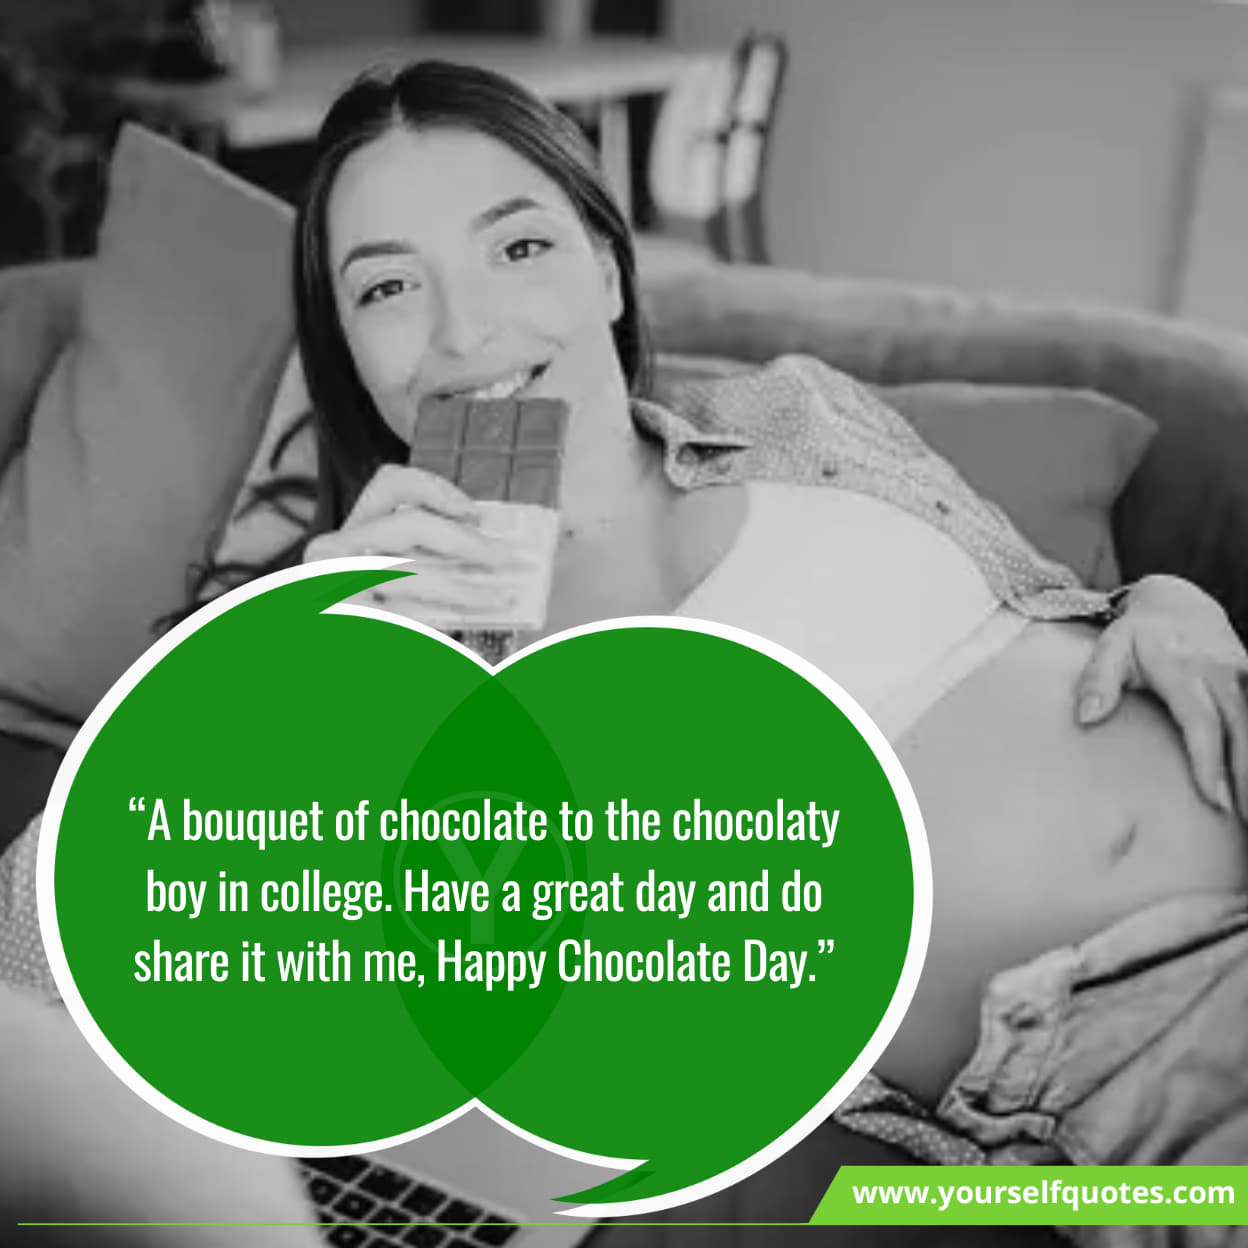 Sweet treats and heartfelt quotes for Chocolate Day in Valentine's Week